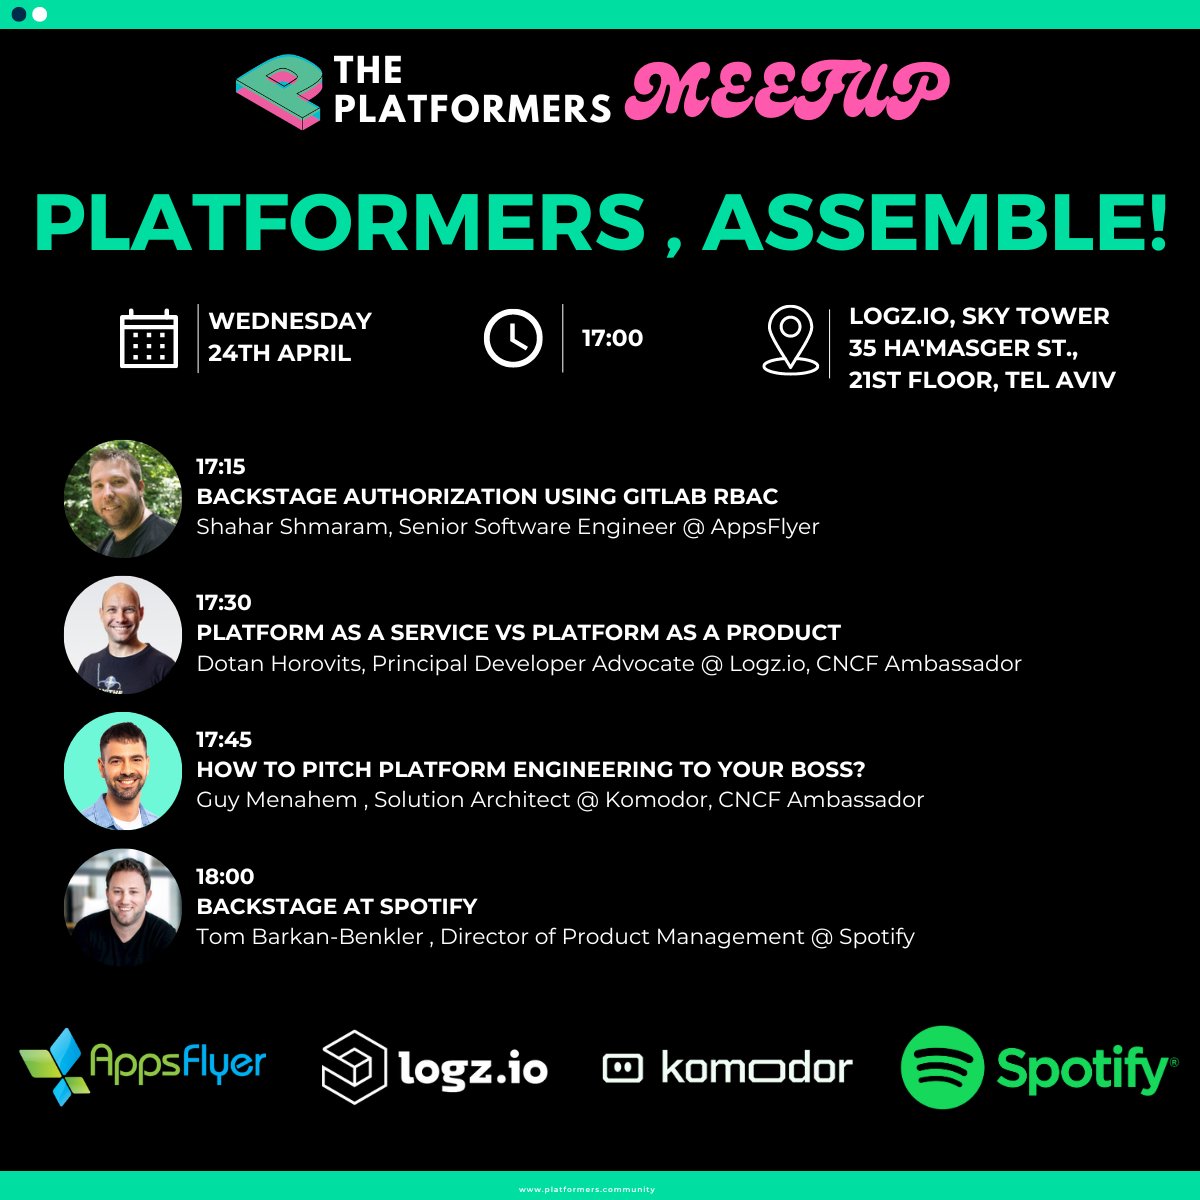 Tom will be joined by @Komodor_com's @the_good_guym & 2 other Platform Engineering experts - Shahar Shmaram @AppsFlyer & @horovits @logzio who'll share their knowledge & experience.